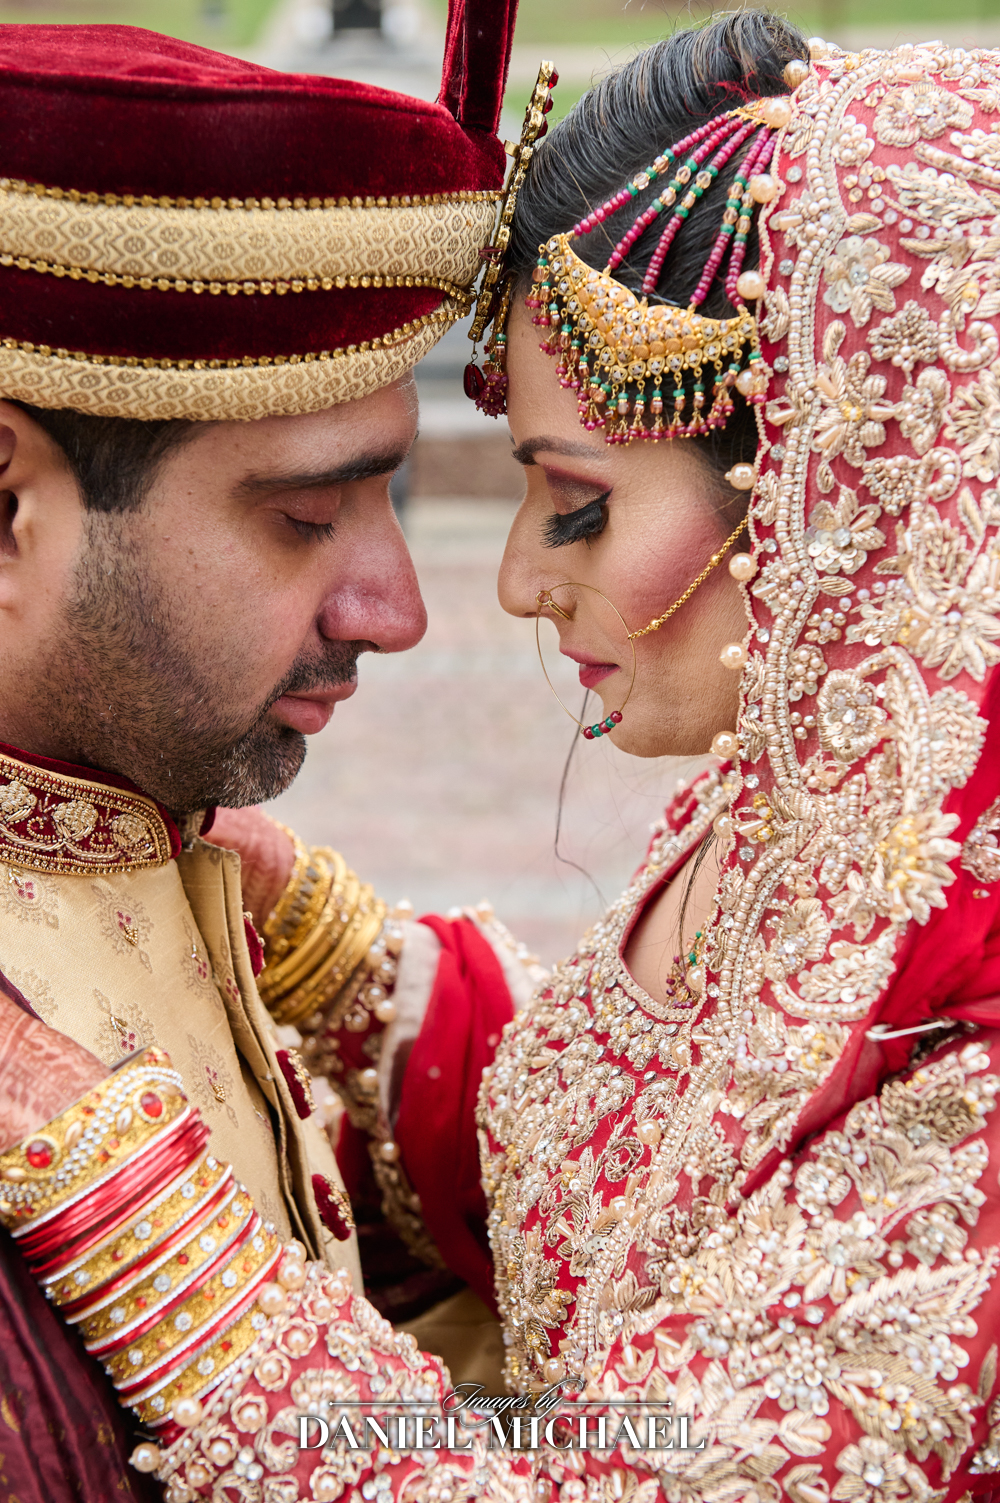 South Asian Muslim couple in traditional wedding attire, with the bride in a richly embroidered lehenga and the groom in a sherwani